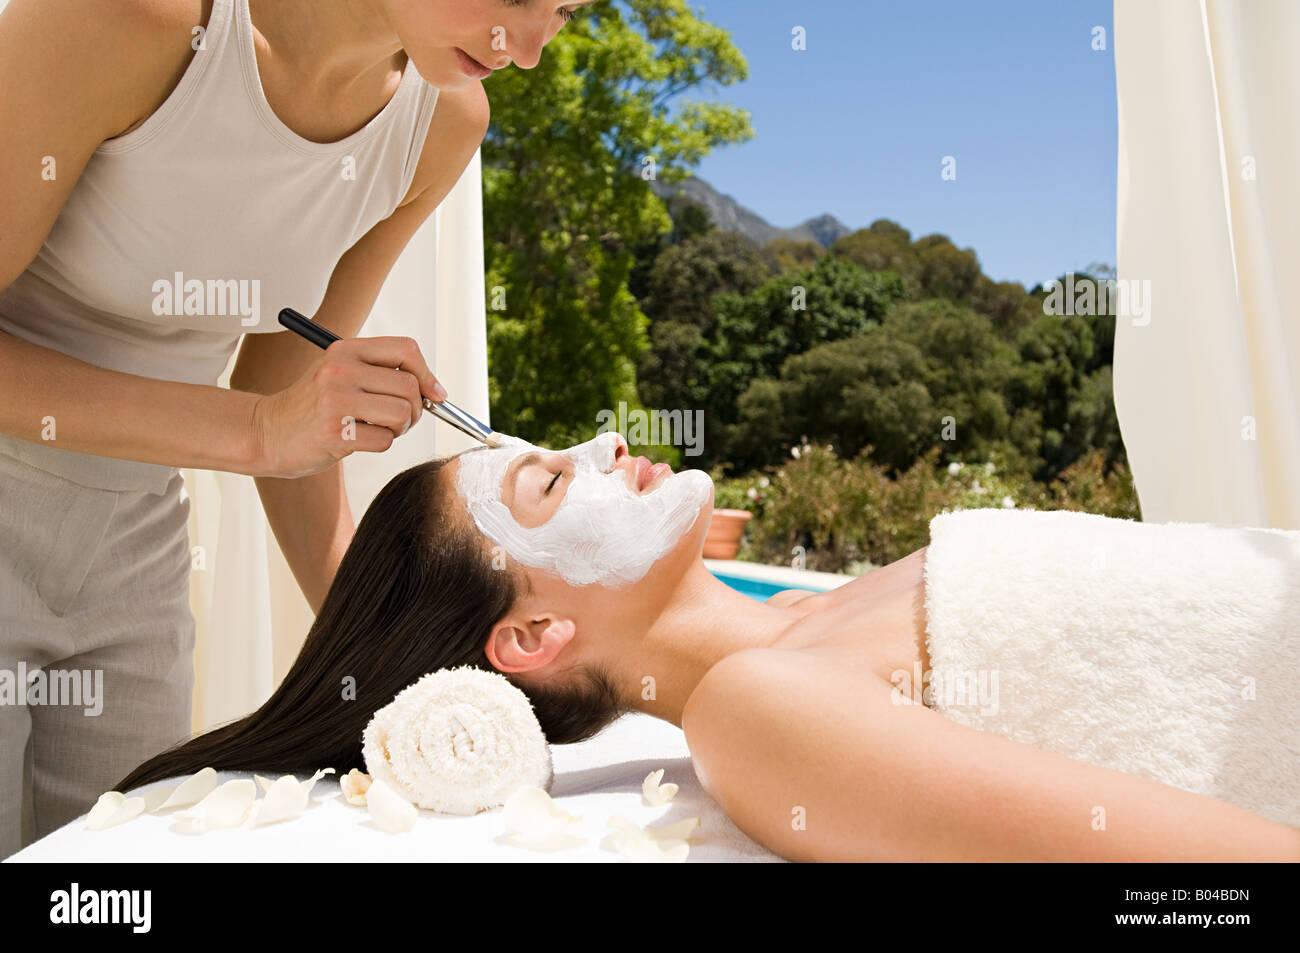 A beautician applying a face mask to a womans face Stock Photo